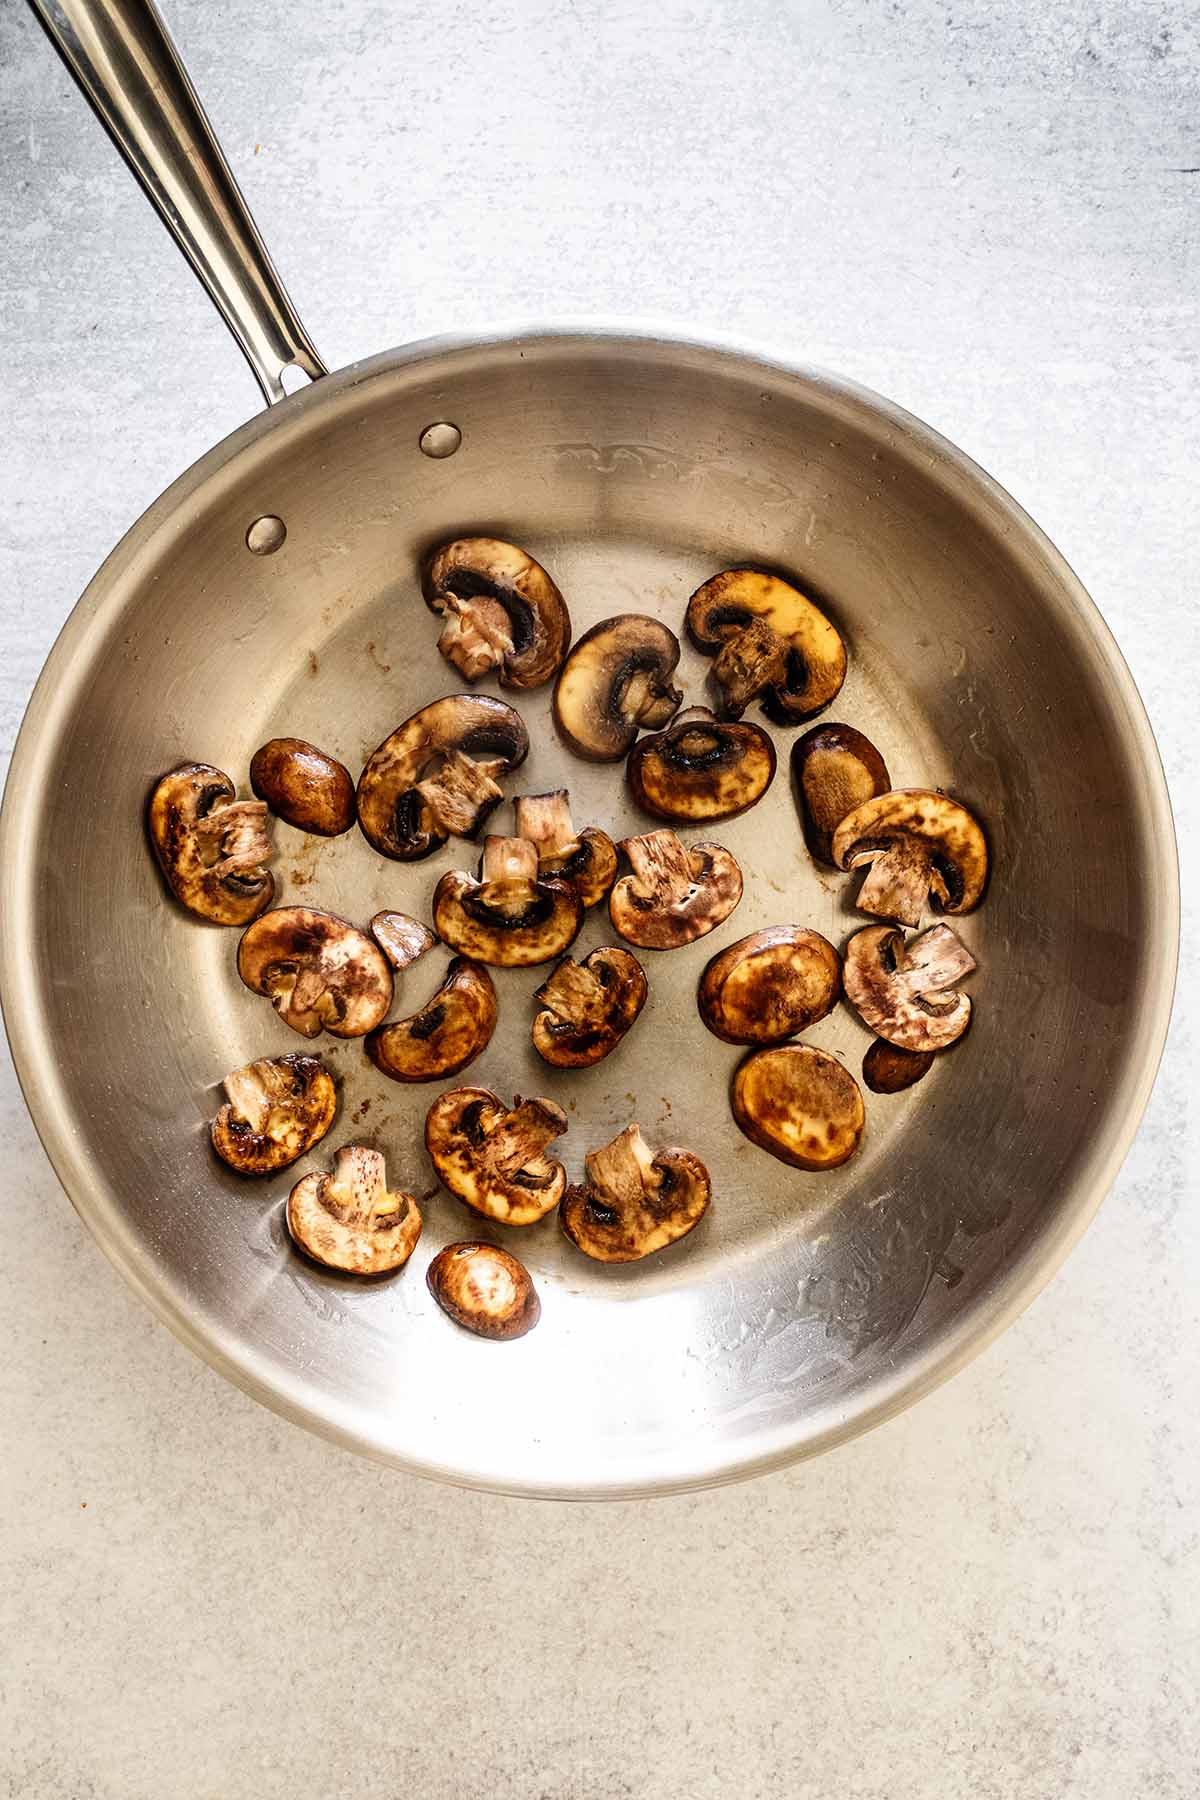 Cooked sliced mushrooms in a stainless steel skillet.